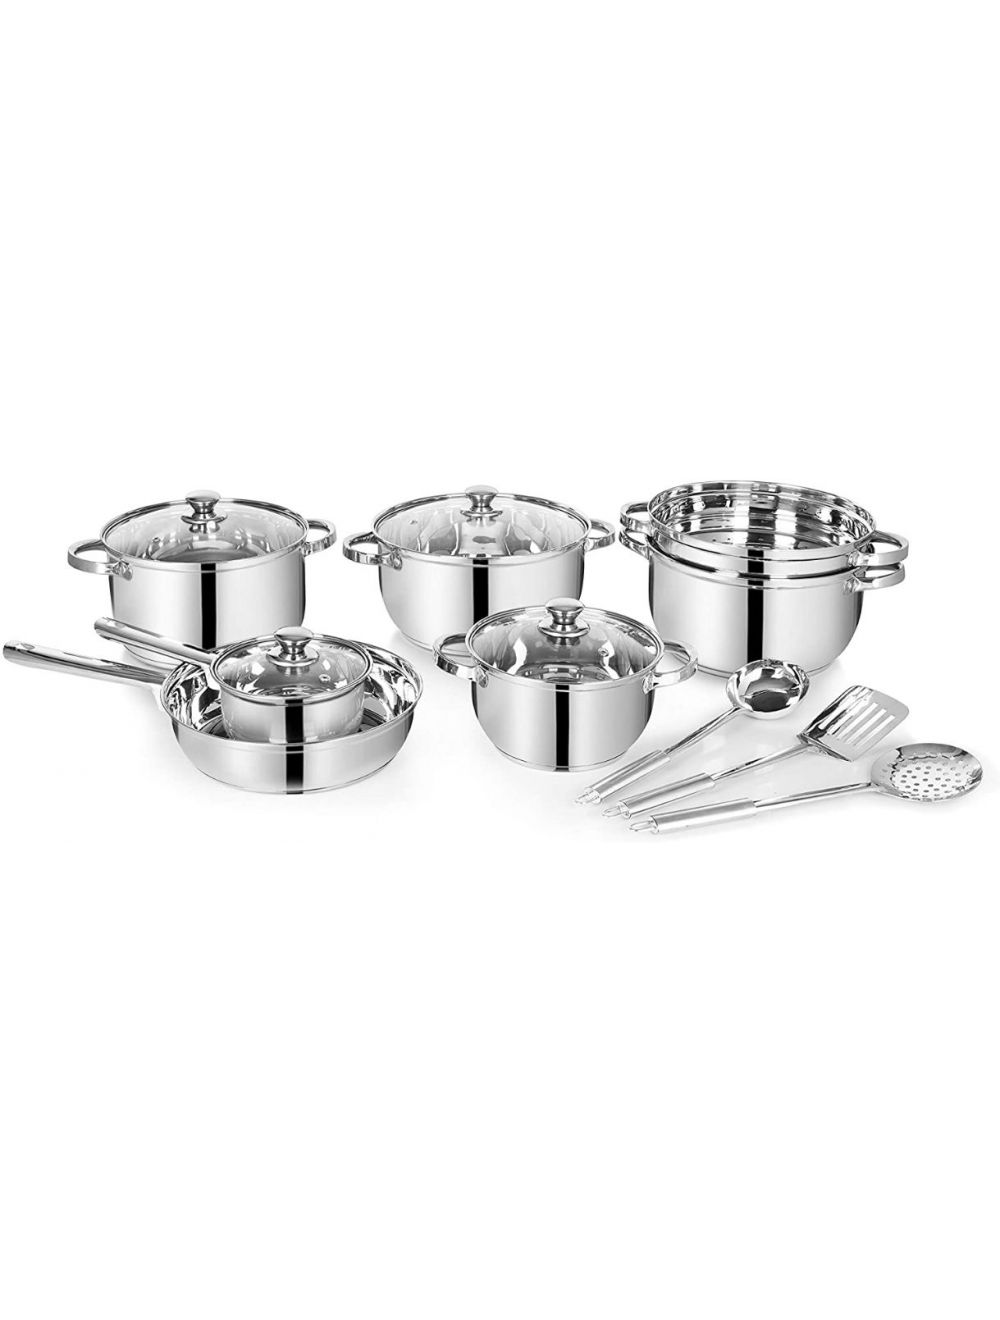 Classic Essentials Supreme Stainless Steel Cookware Set Silver 13-Piece-CE-SV13